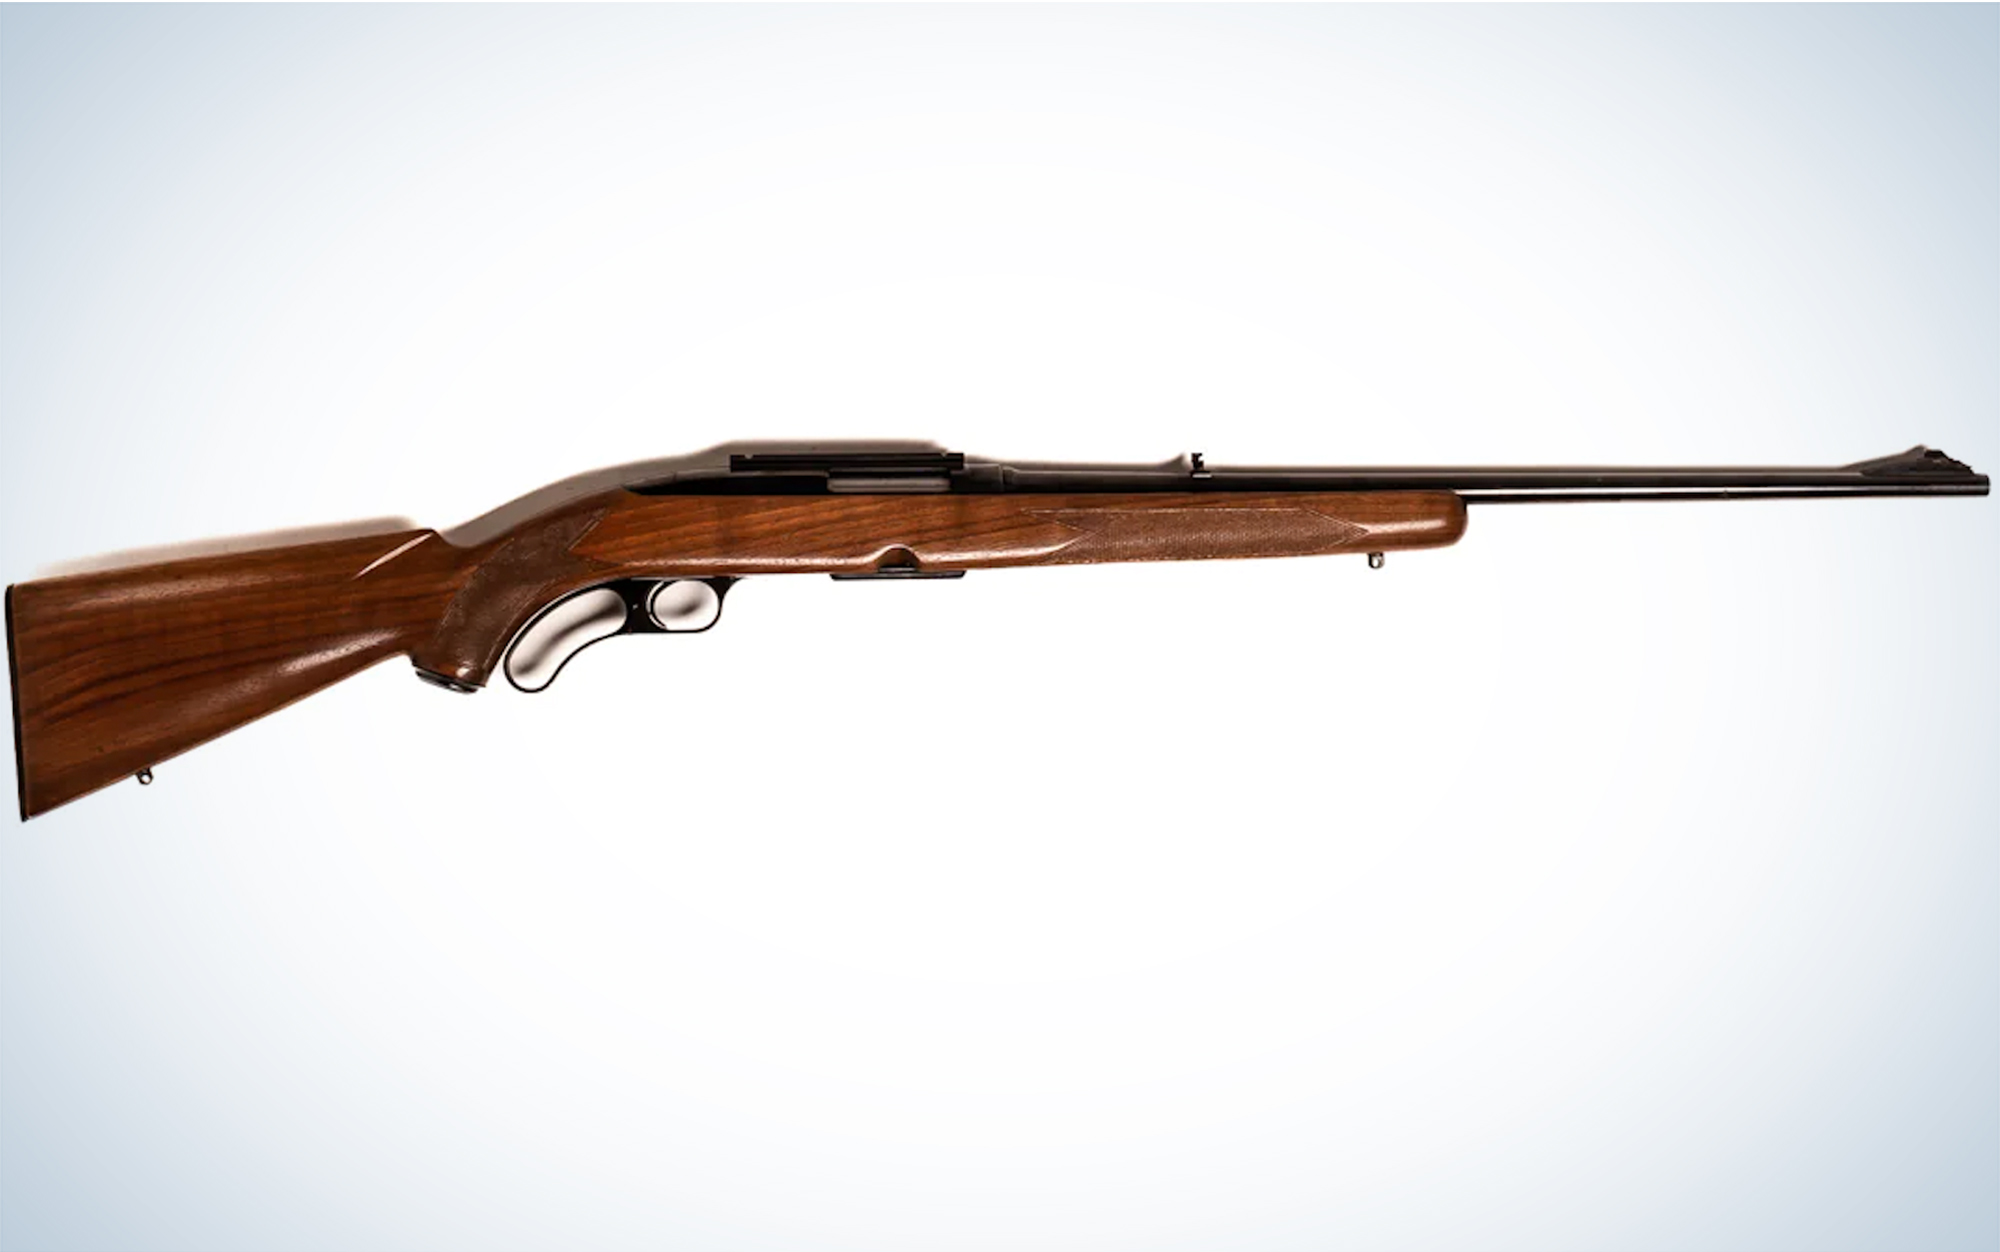 The Winchester Model 88 is one of the best lever action rifles.